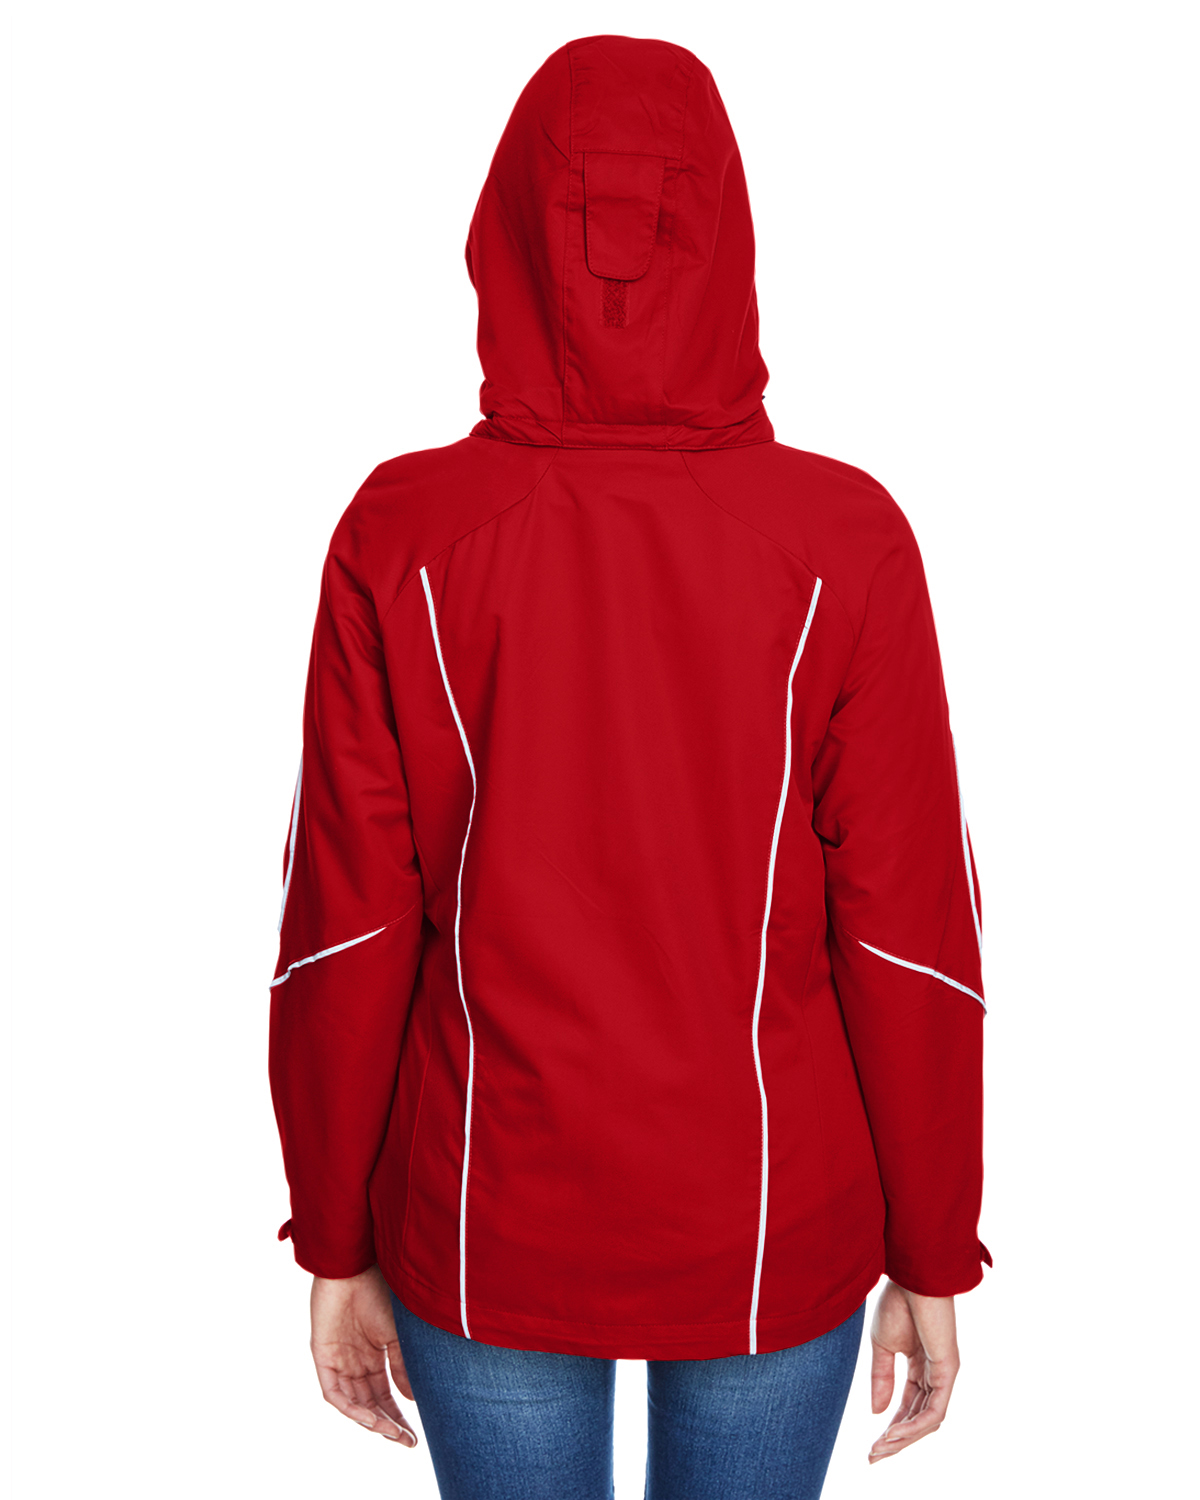 Ladies' Angle 3-in-1 Jacket with Bonded Fleece Liner - CLASSIC RED - XS - image 2 of 3